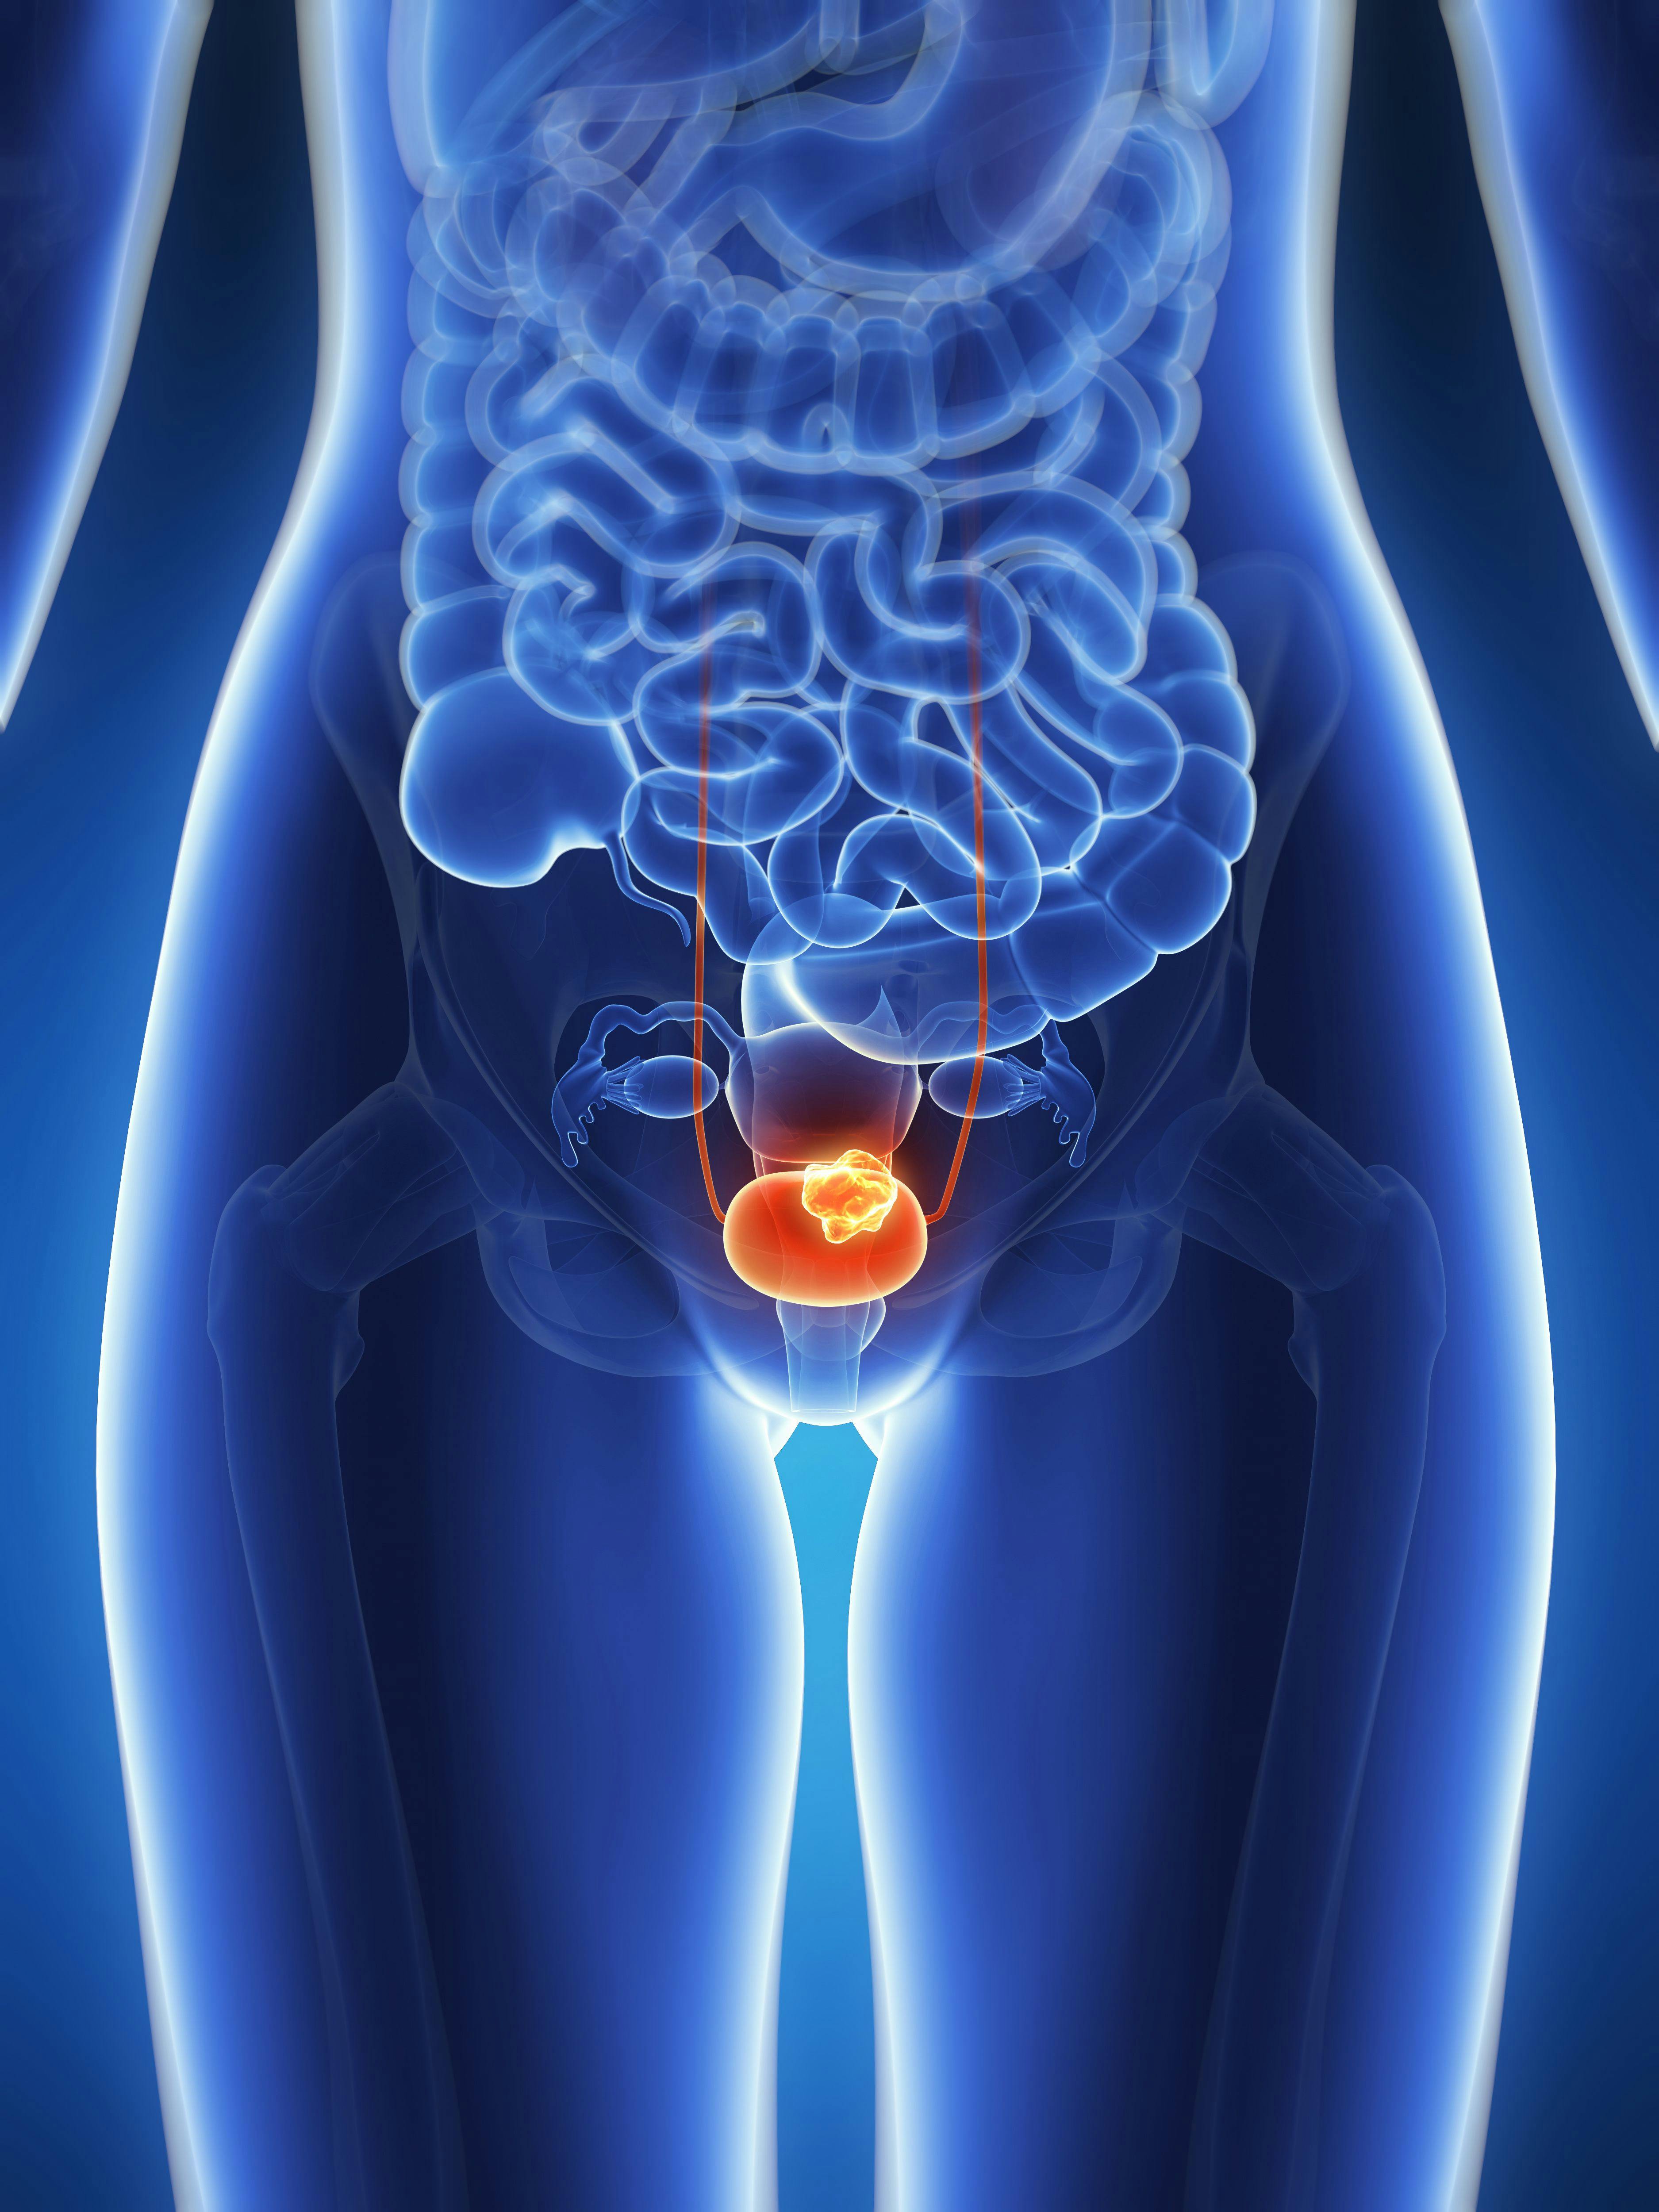 BT8009 monotherapy, which received fast track designation from the FDA, may be beneficial for adult patients with locally advanced or metastatic urothelial cancer.